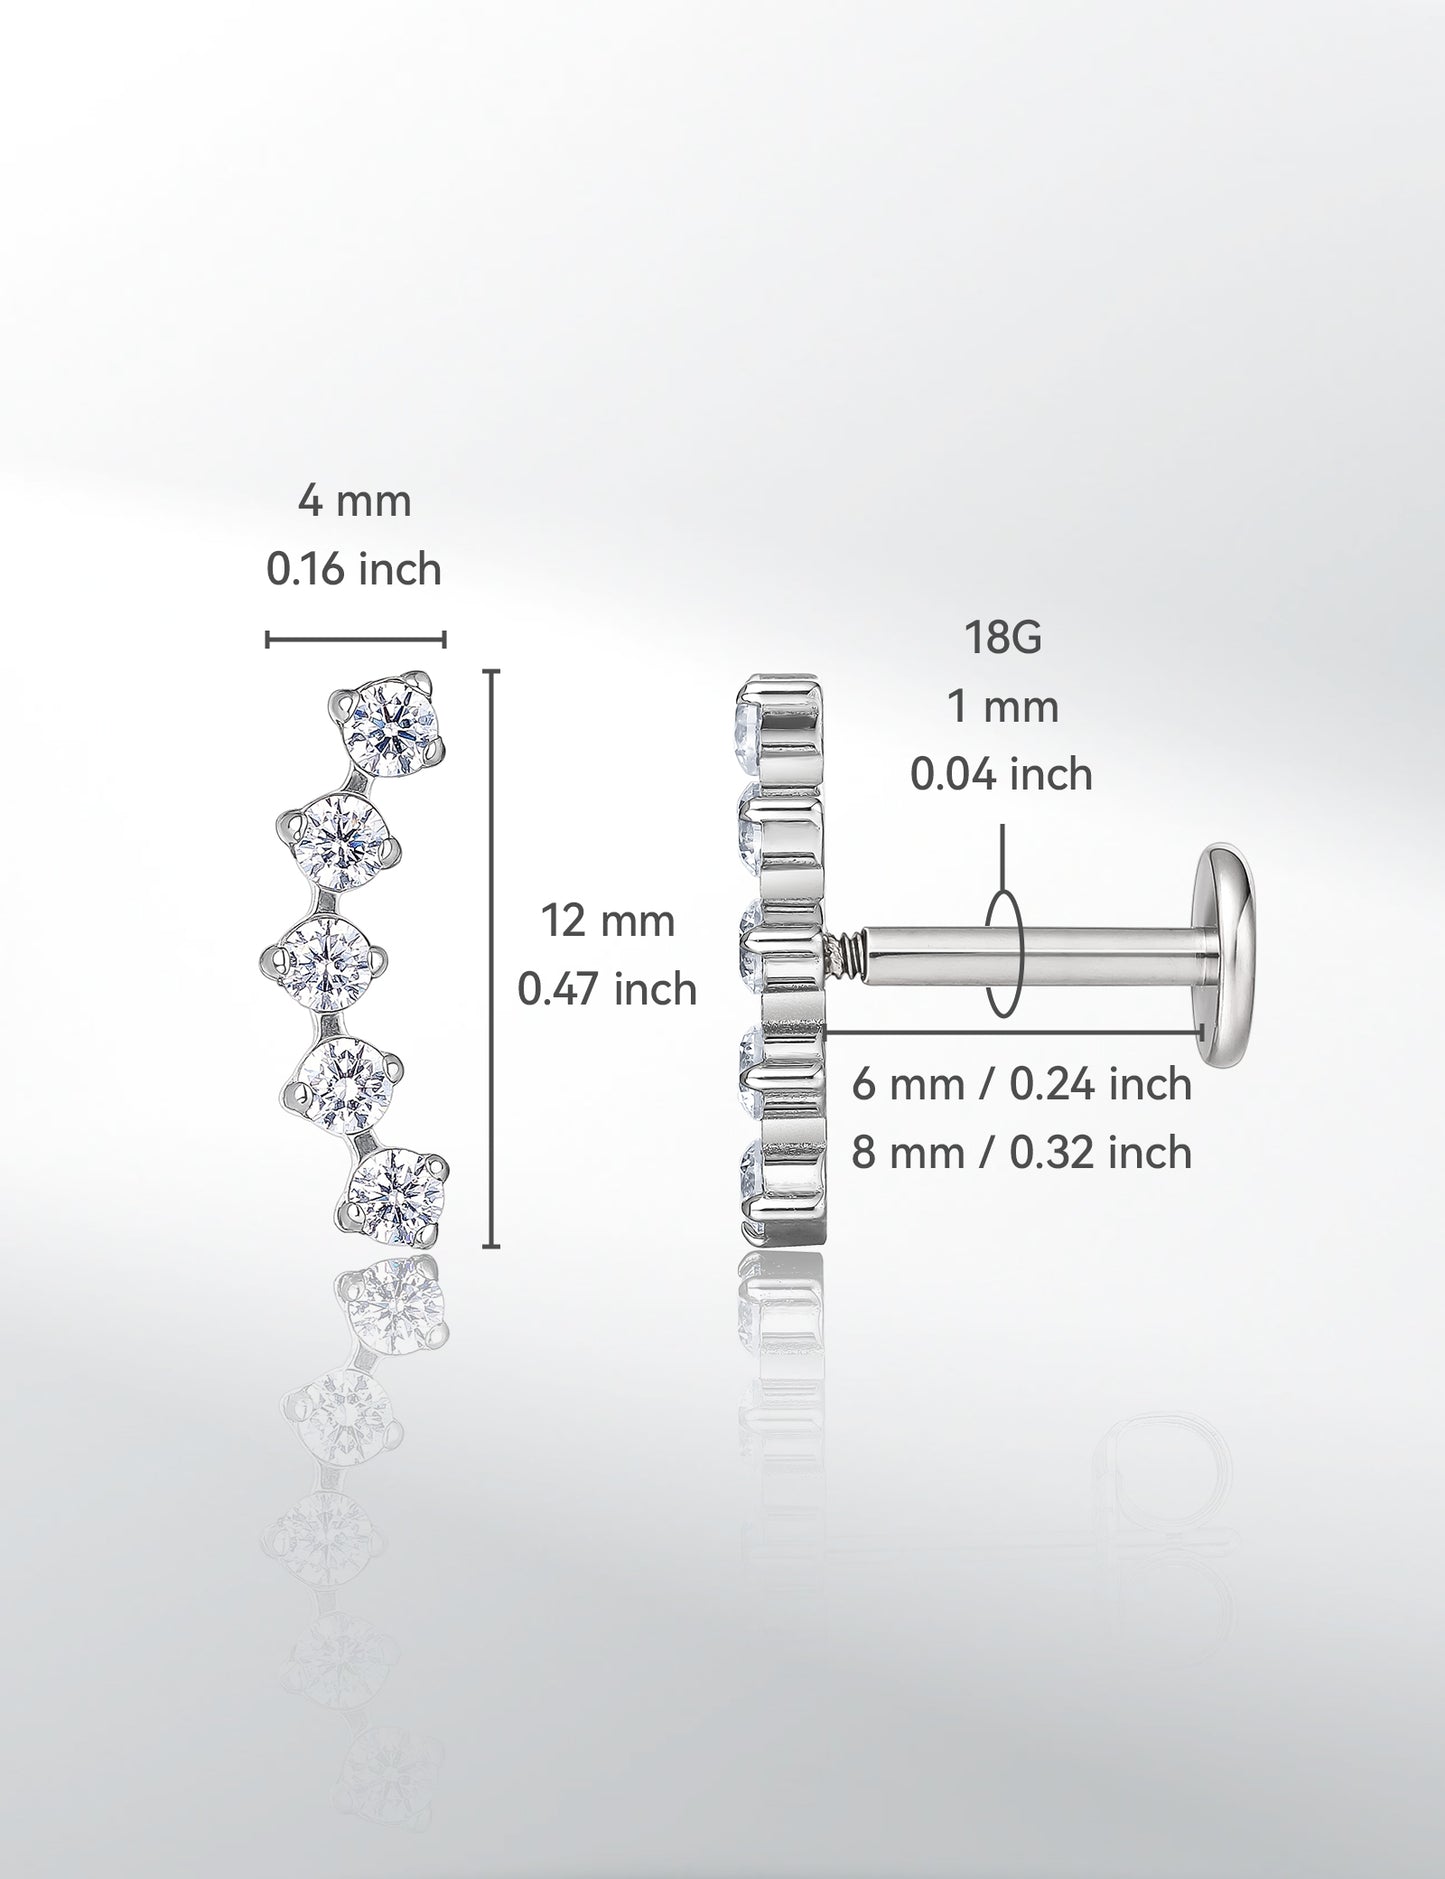 limerencia 18g Titanium Internally Threaded Tragus Piercing Jewelry CZ Top Flat Back Piercing Nose Studs Earring, Helix, Cartilage, Labret, Monroe for Women or Men- Five Prong Cluster